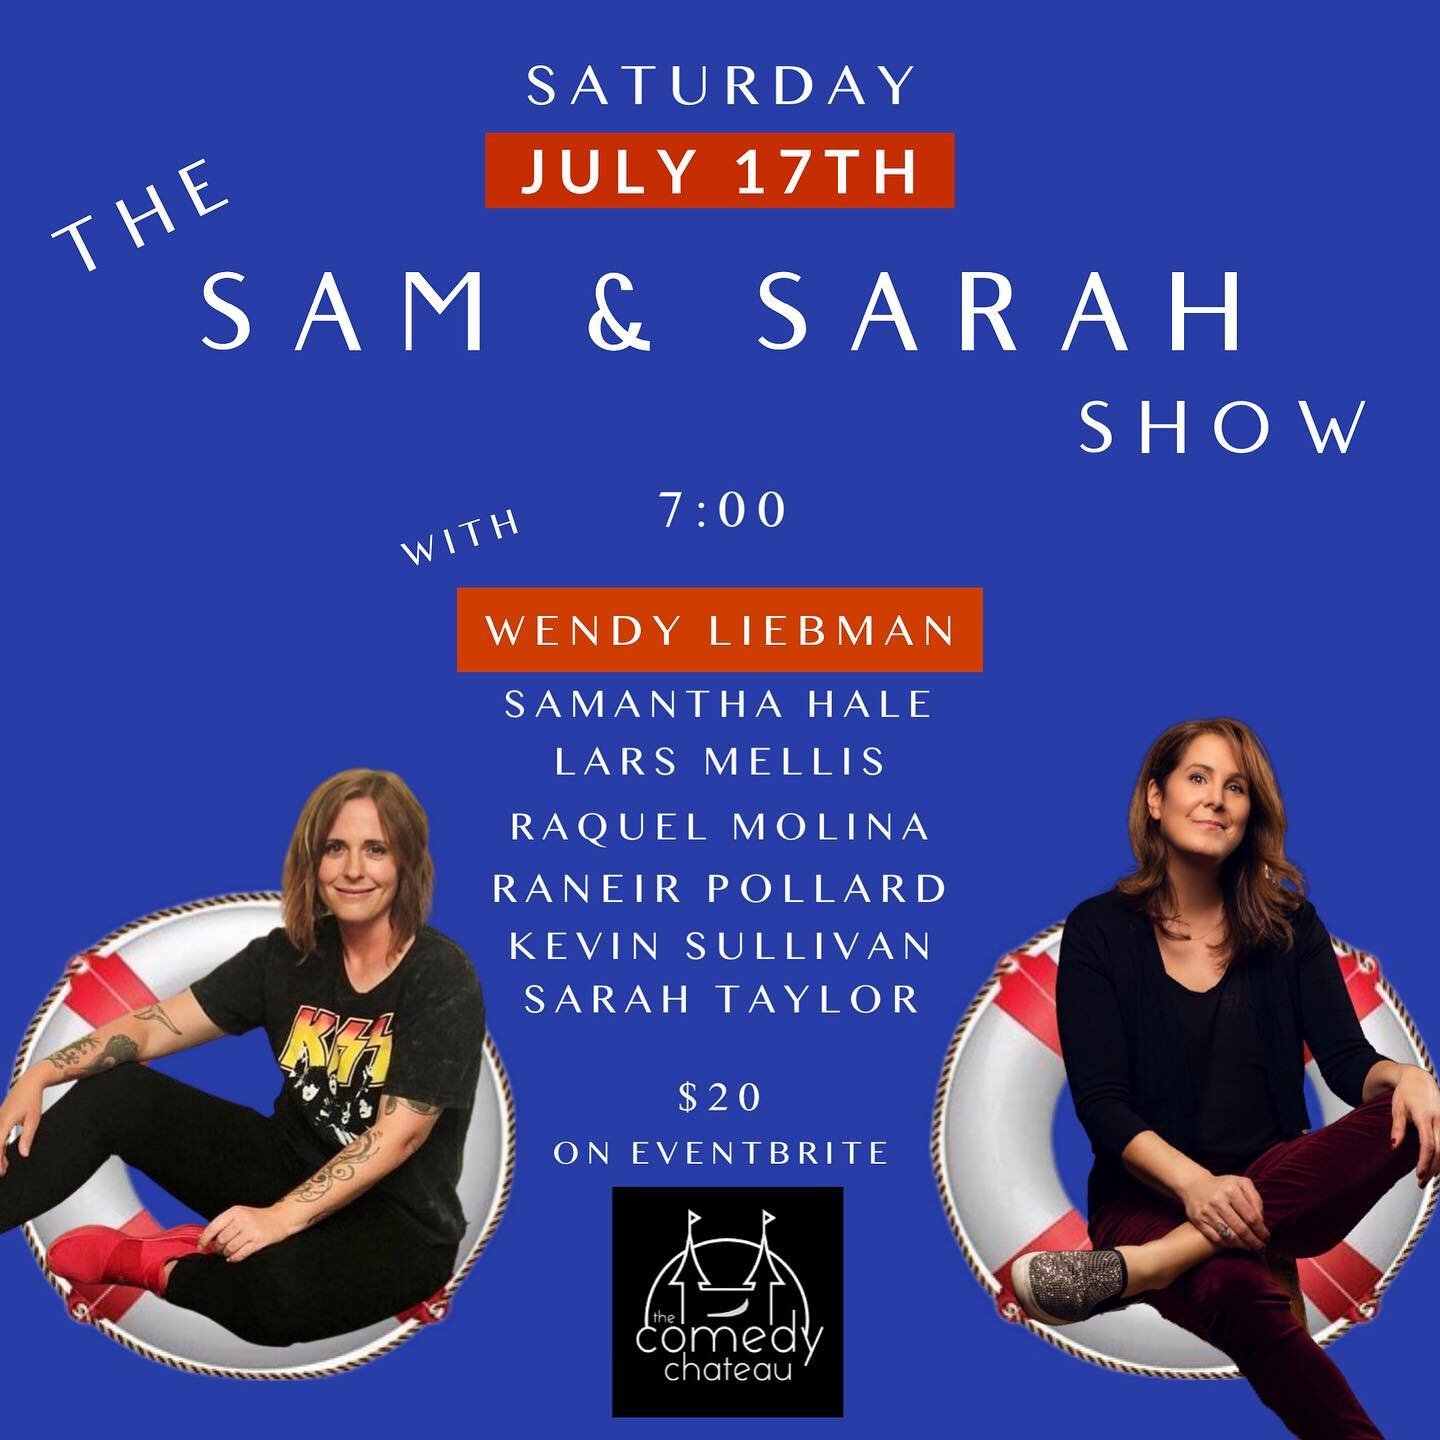 At midnight Saturday we all turn into pumpkins who wear masks indoors. So come to The Comedy Chateau this Saturday night, 7/17, for 🅣🅗🅔 🅢🅐🅜 &amp; 🅢🅐🅡🅐🅗 🅢🅗🅞🅦 at 7 with my partner in crime/comedy @thesamanthahale! 
☄️
Out hot hot lineup 